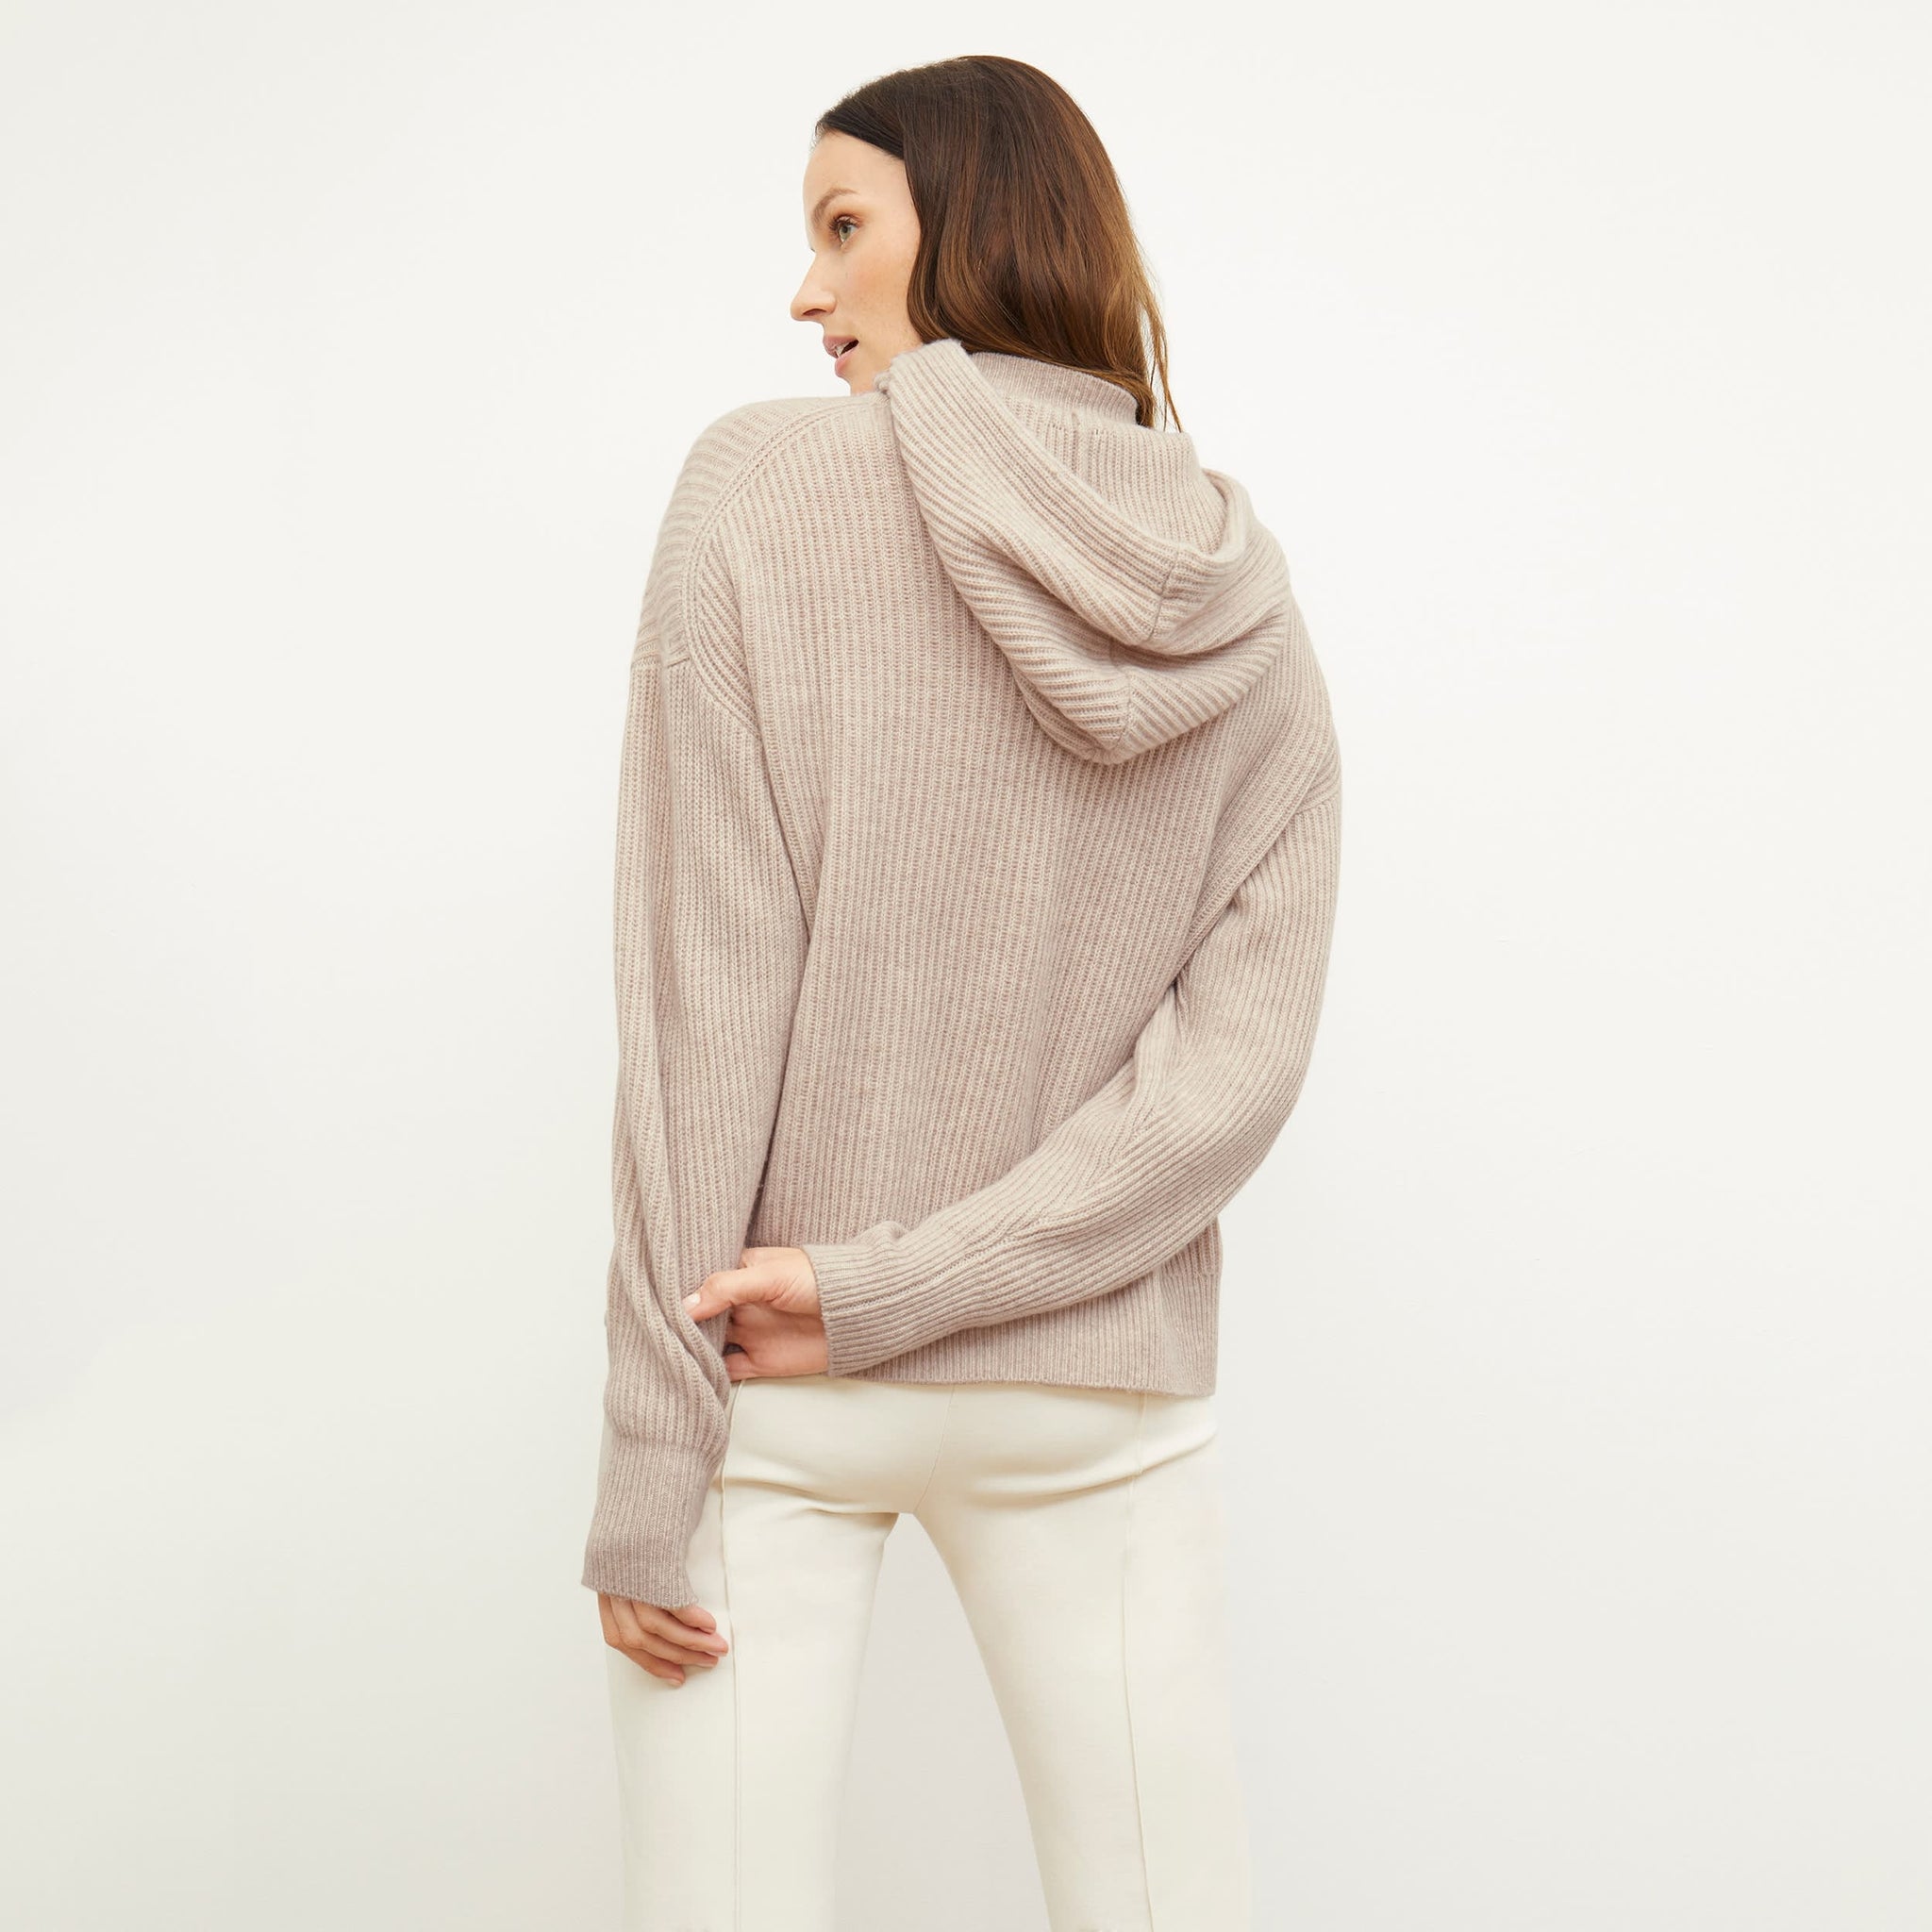 Back image of a woman standing wearing the Freya Hoodie—Cashmere/Wool in Oatmeal Melange